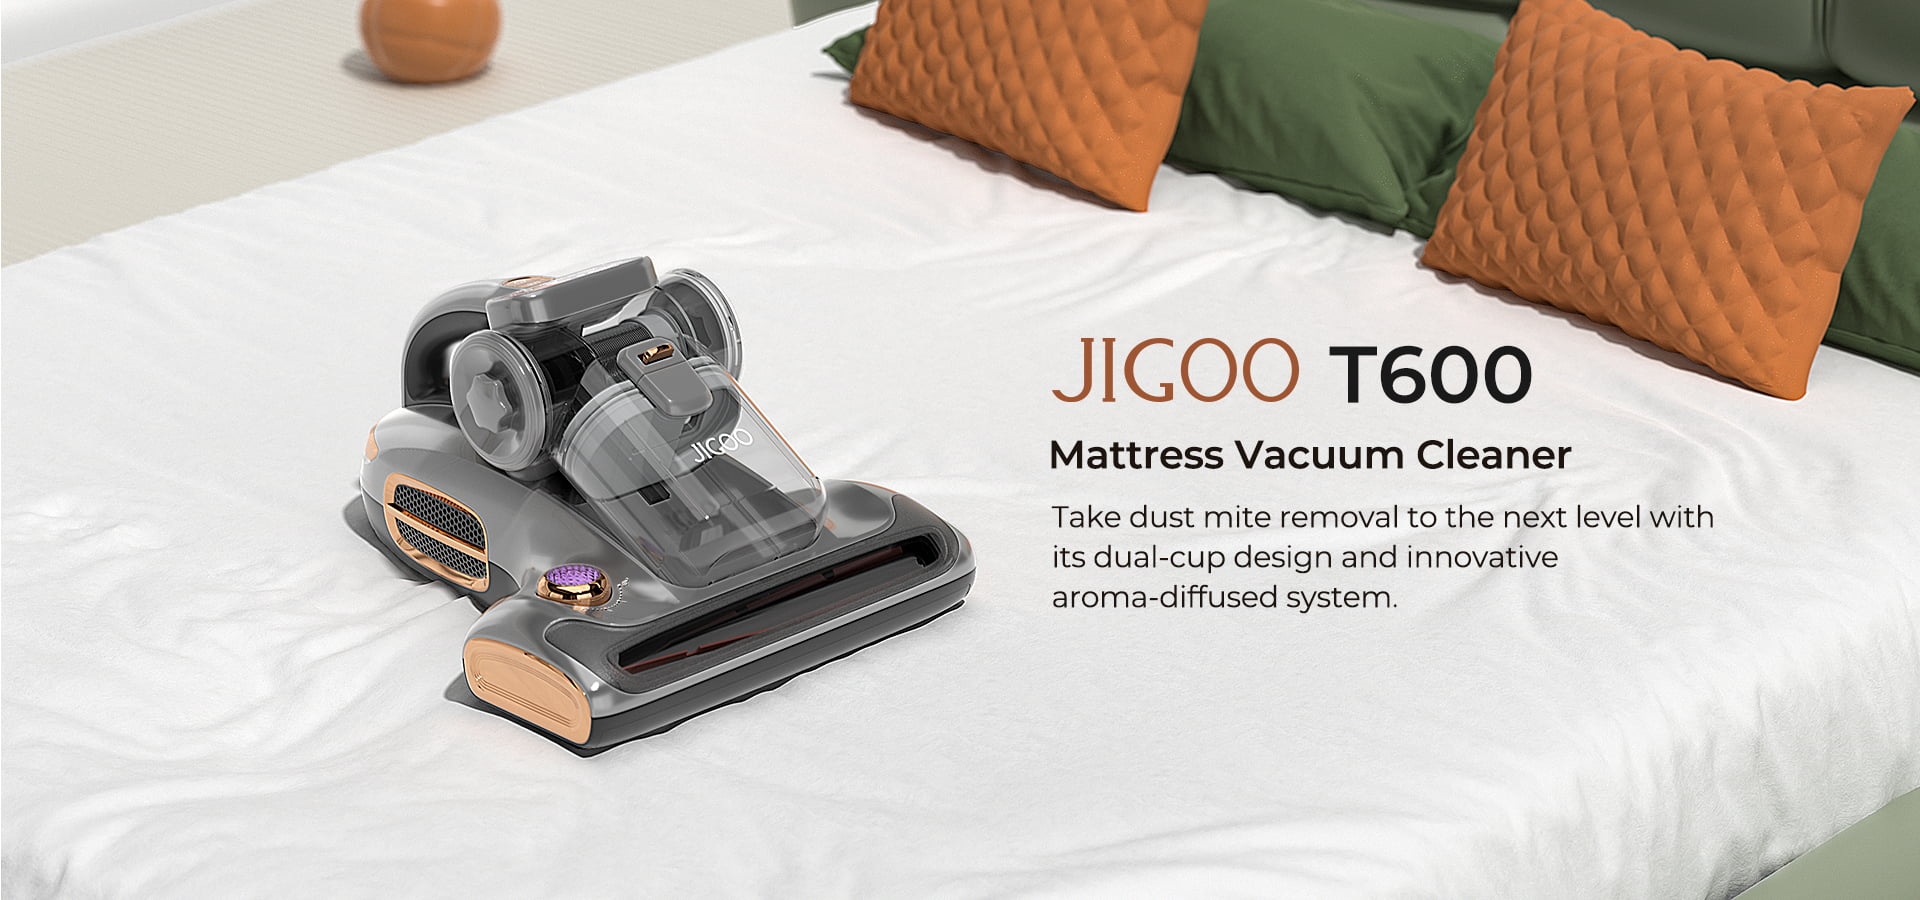 JIGOO T600 Bed Mattress Vacuum Cleaner, Dual Cup Design, 99.99% Dust Mite Removal with Aroma - Grey